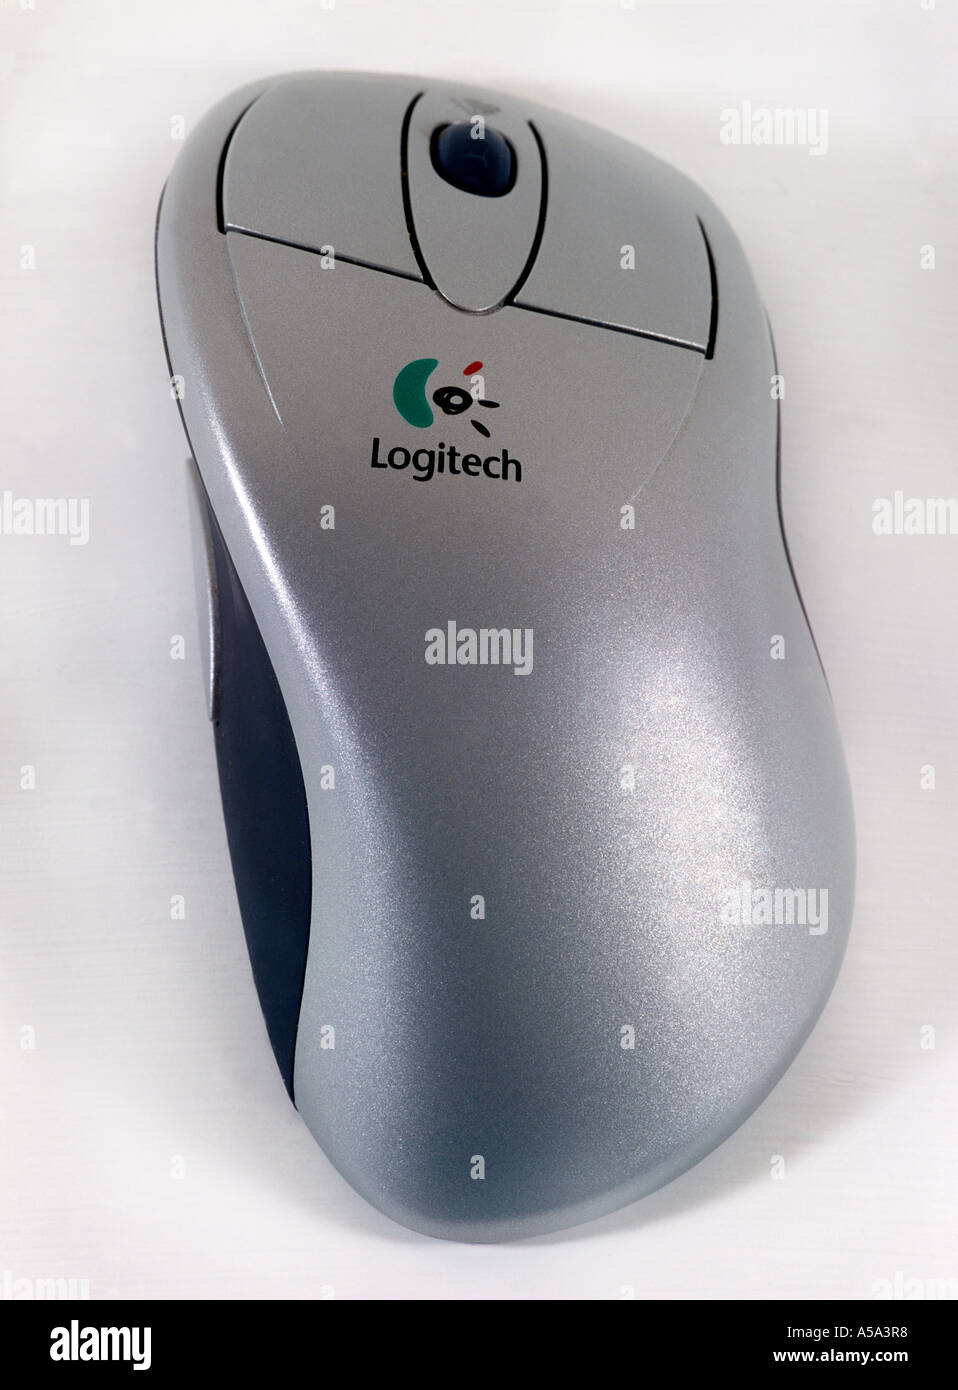 Logitech Mouse High Resolution Stock Photography and Images - Alamy